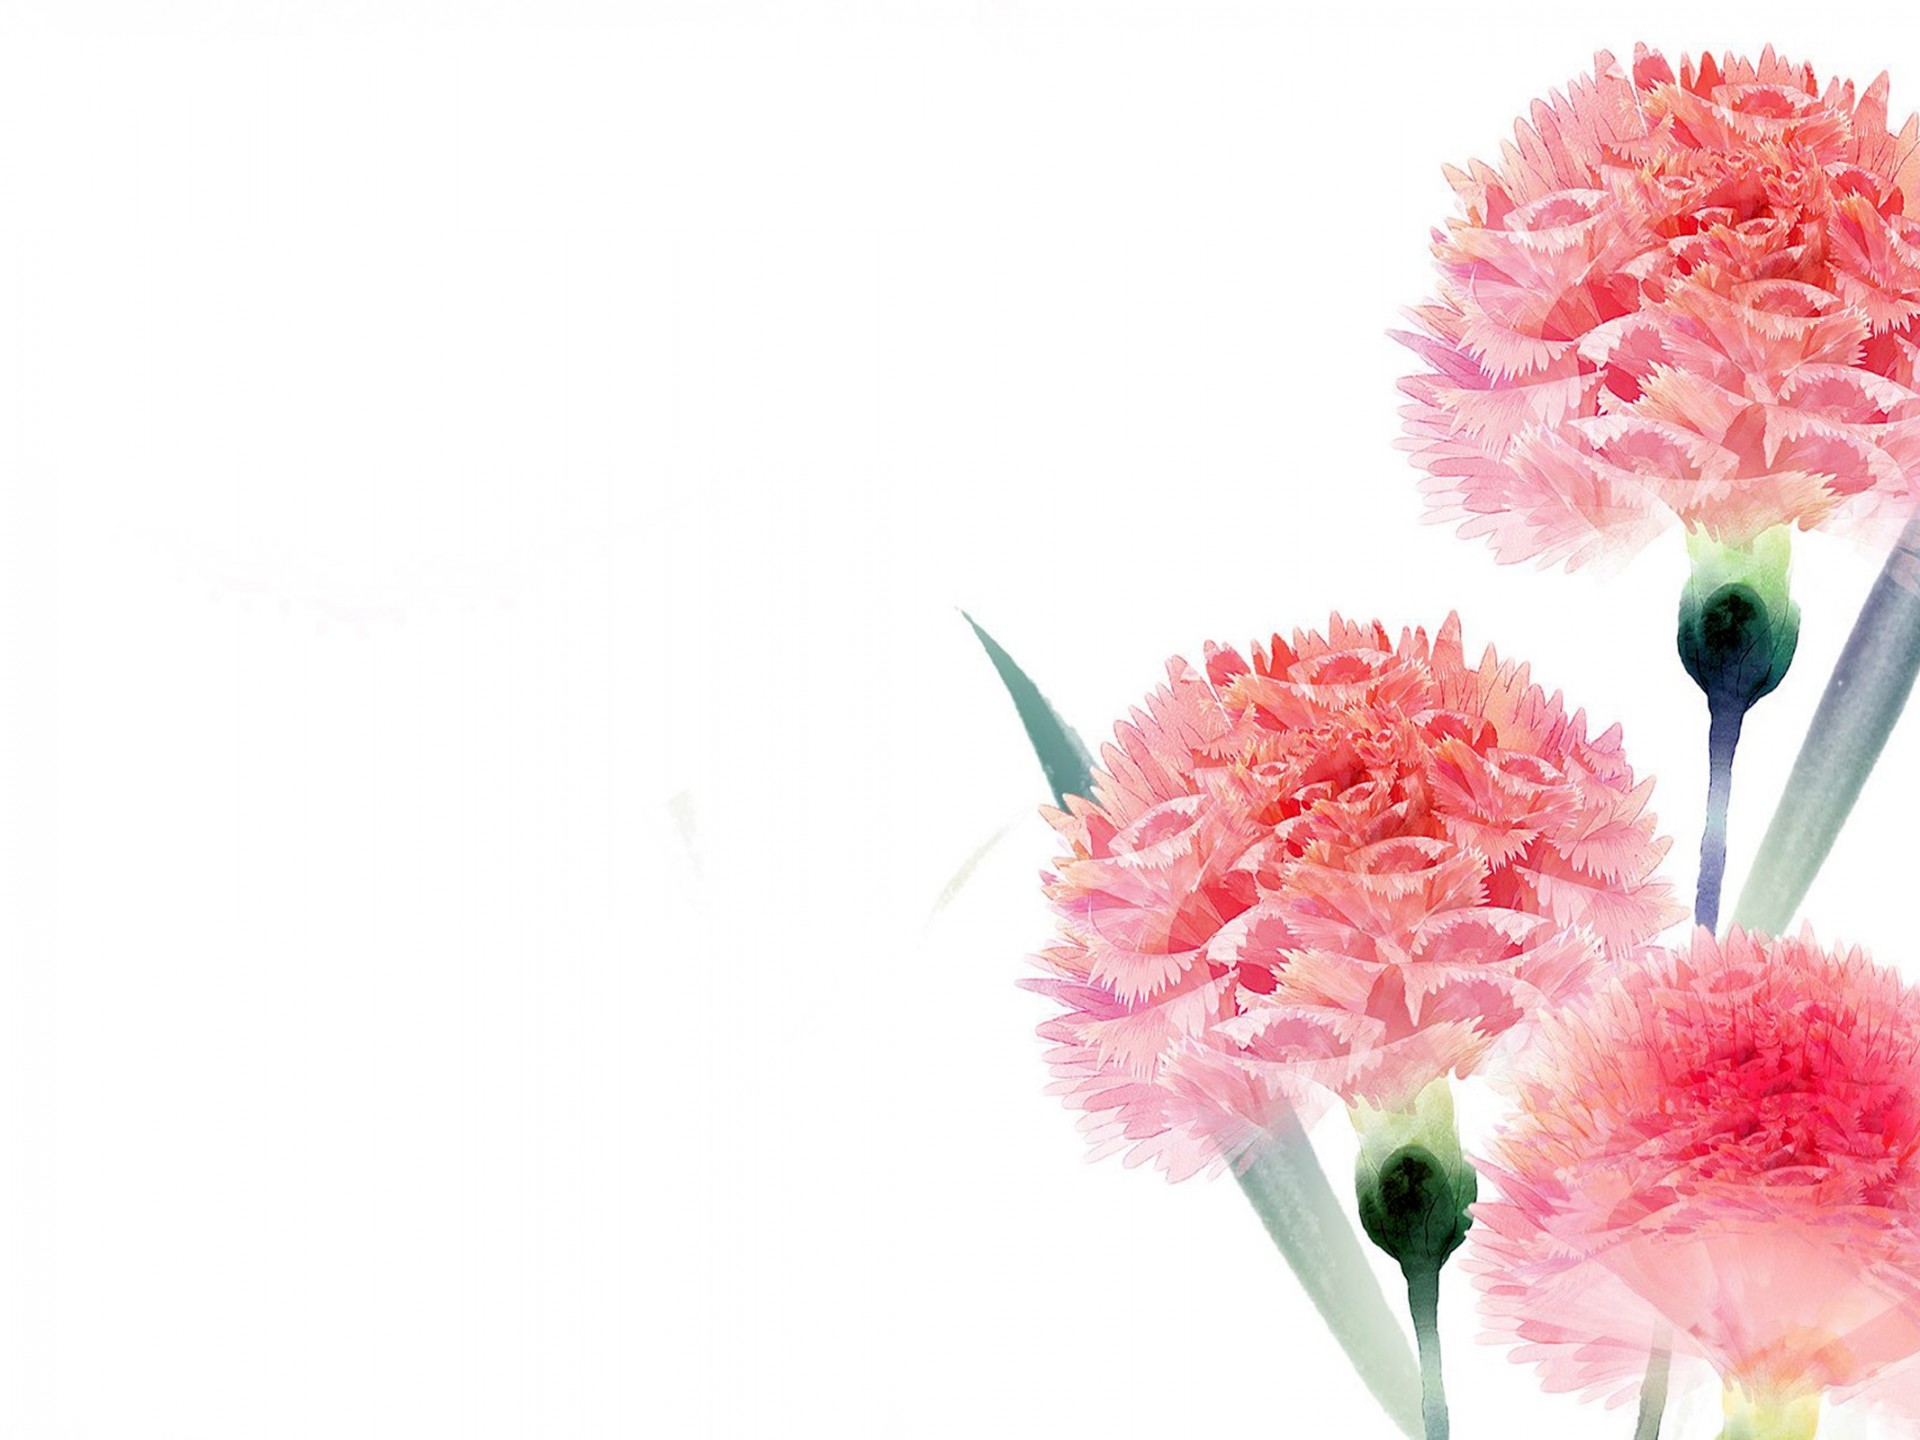 Free Download Frosty Pink Carnations Hd Wallpaper Wallpapers13com 19x1440 For Your Desktop Mobile Tablet Explore 71 Carnation Wallpaper Hd Flowers Wallpaper Free Wallpaper Online Flowers Carnations Desk Toppers Wallpaper